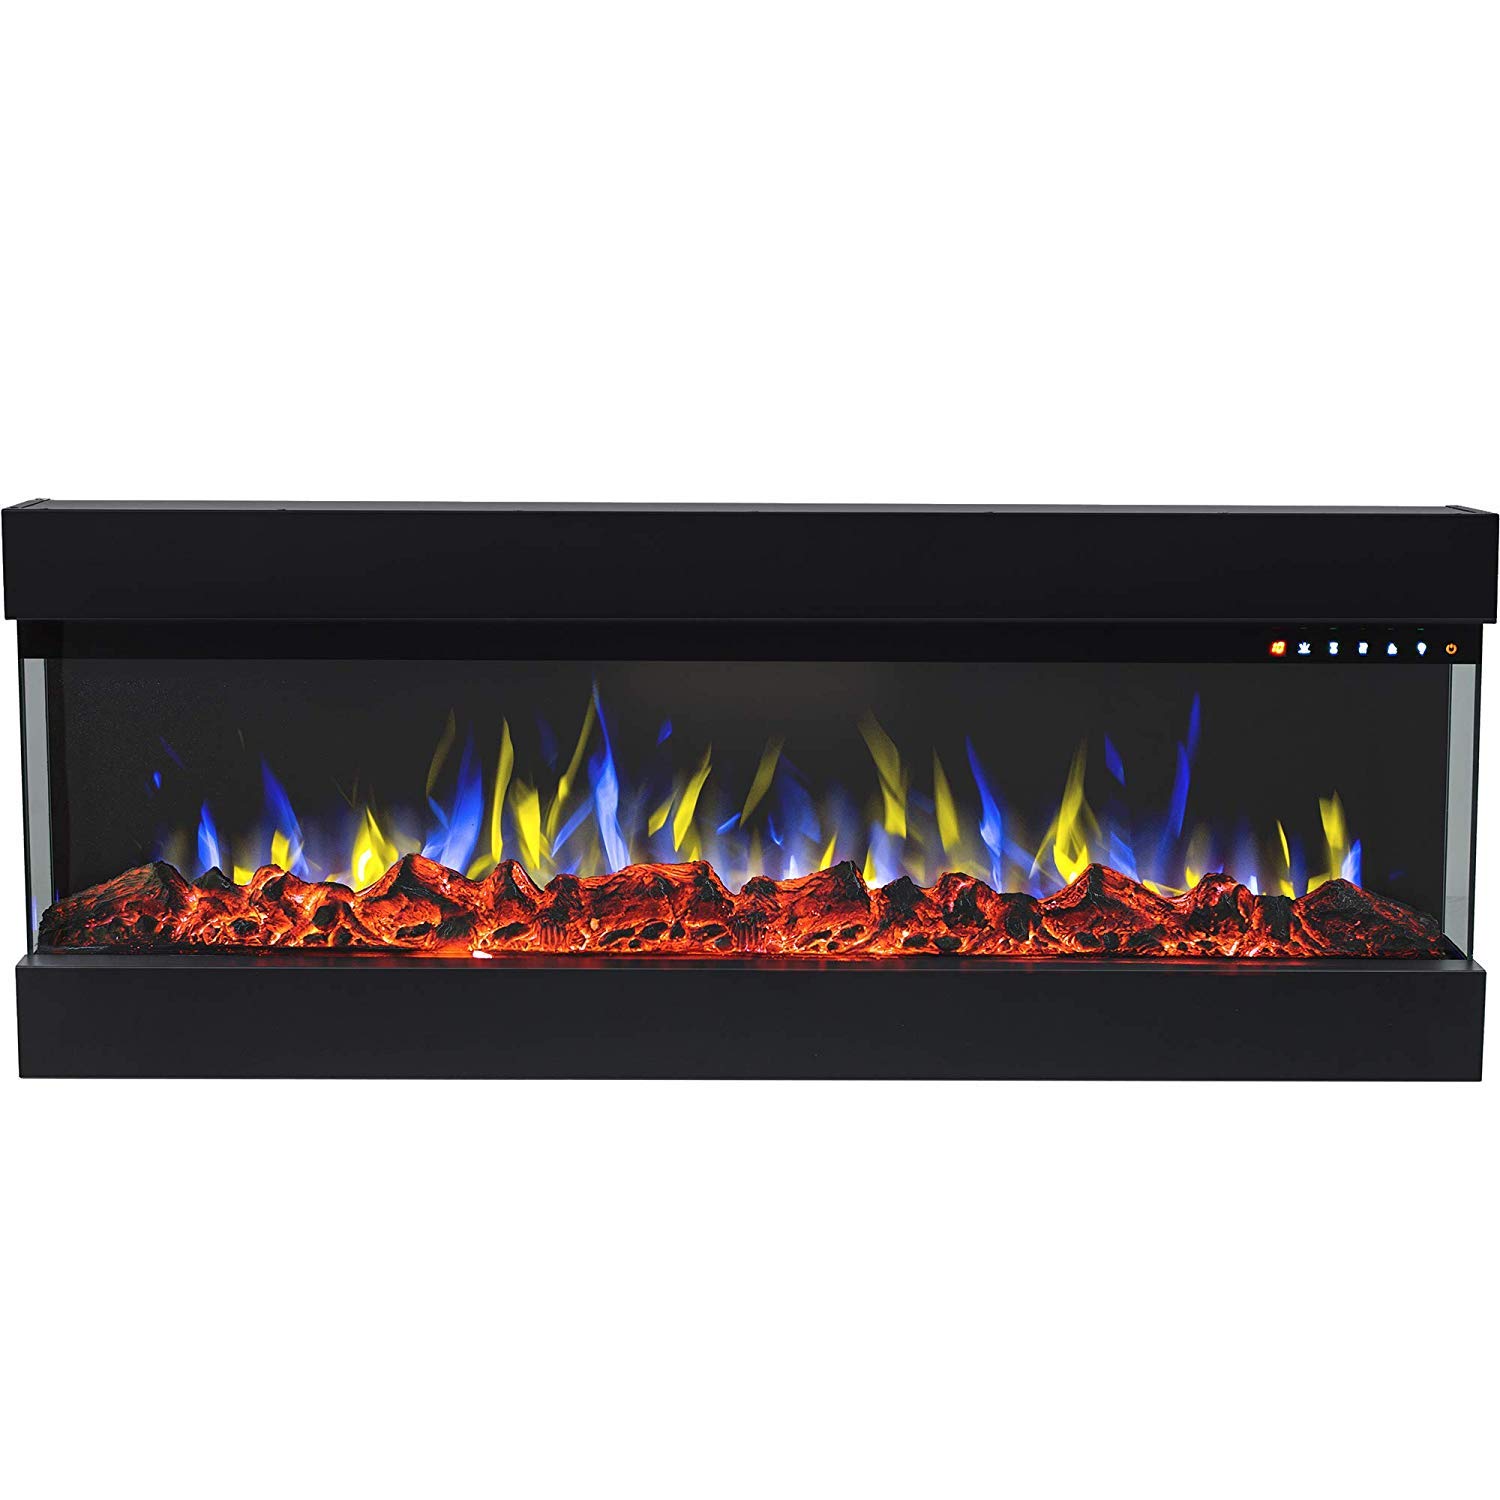 Regal Flame 43" Spectrum Modern Linear Electric 3 Sided Wall Mounted Built-in Recessed Fireplace